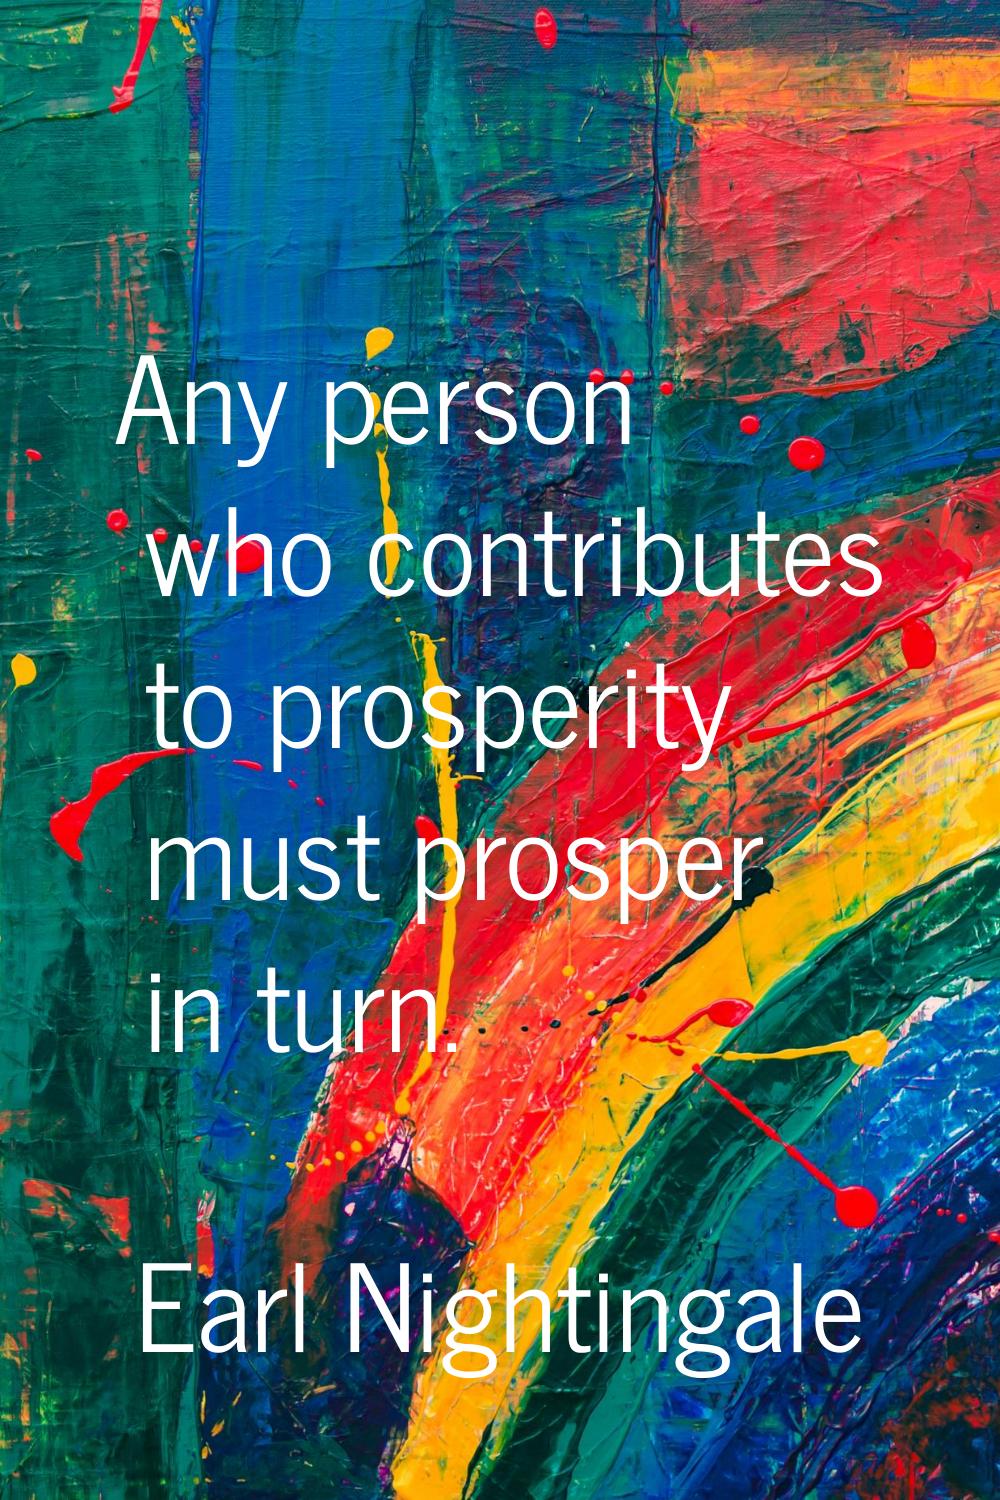 Any person who contributes to prosperity must prosper in turn.